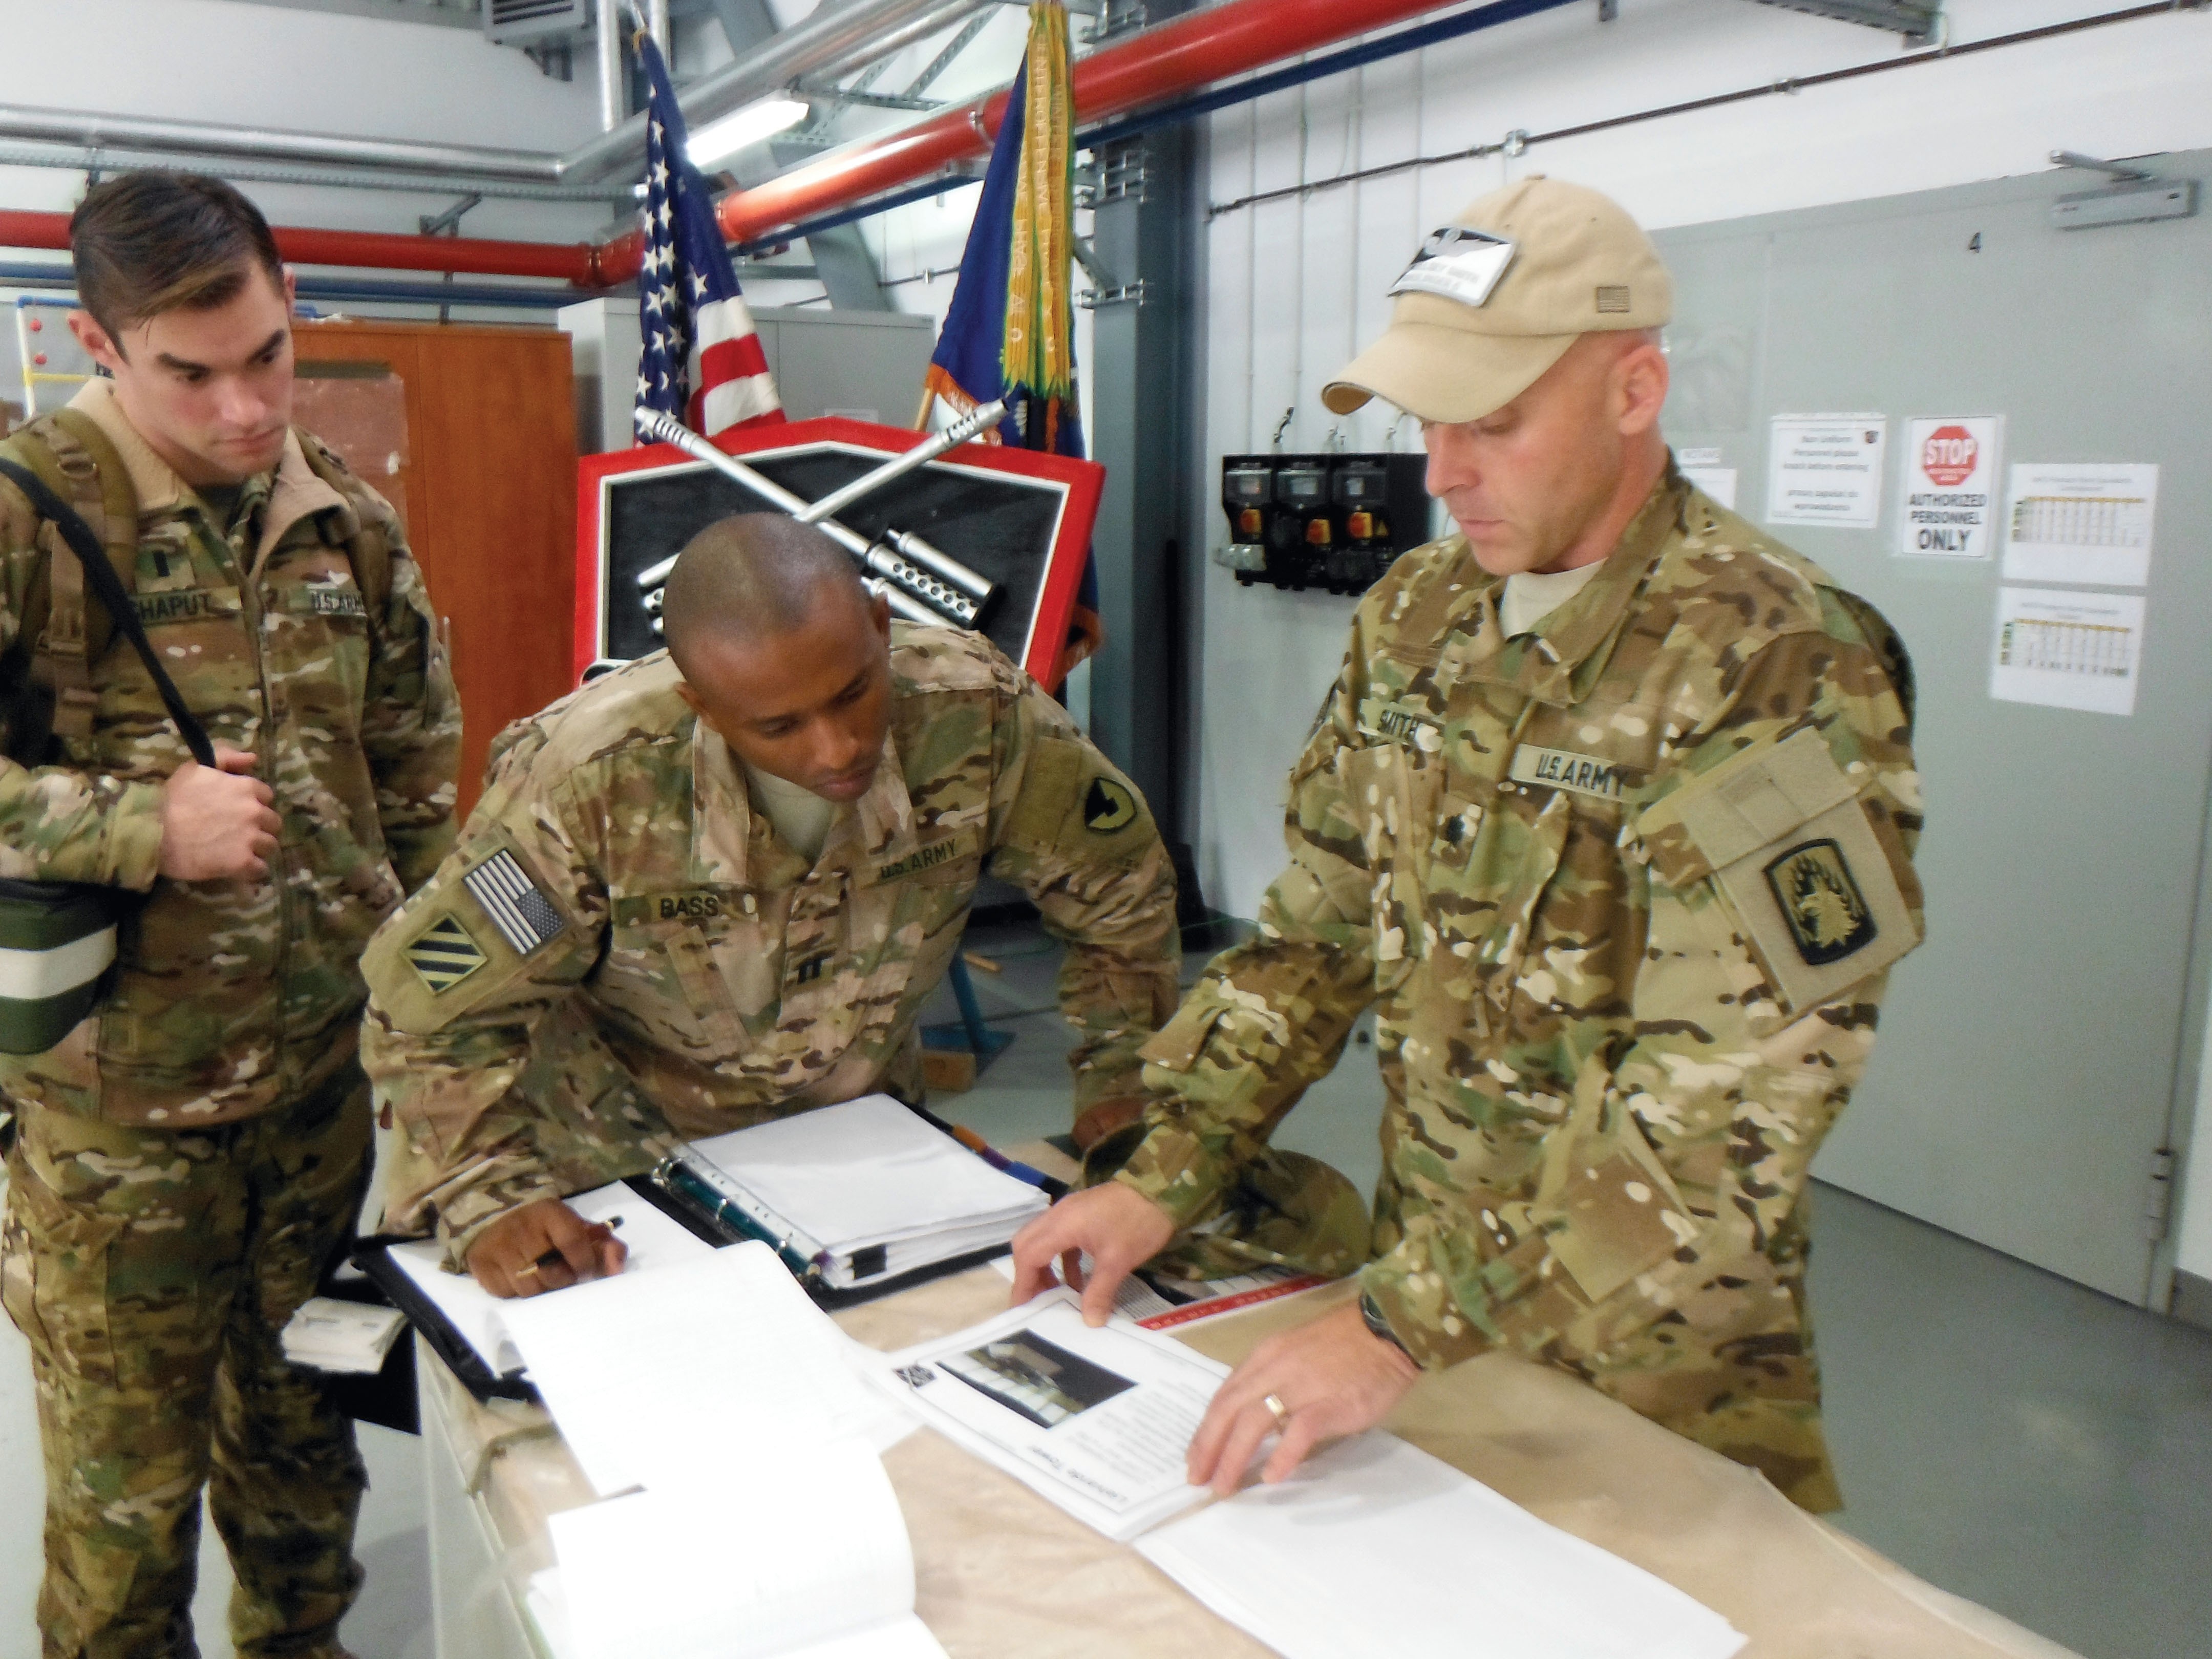 What we learned | Article | The United States Army